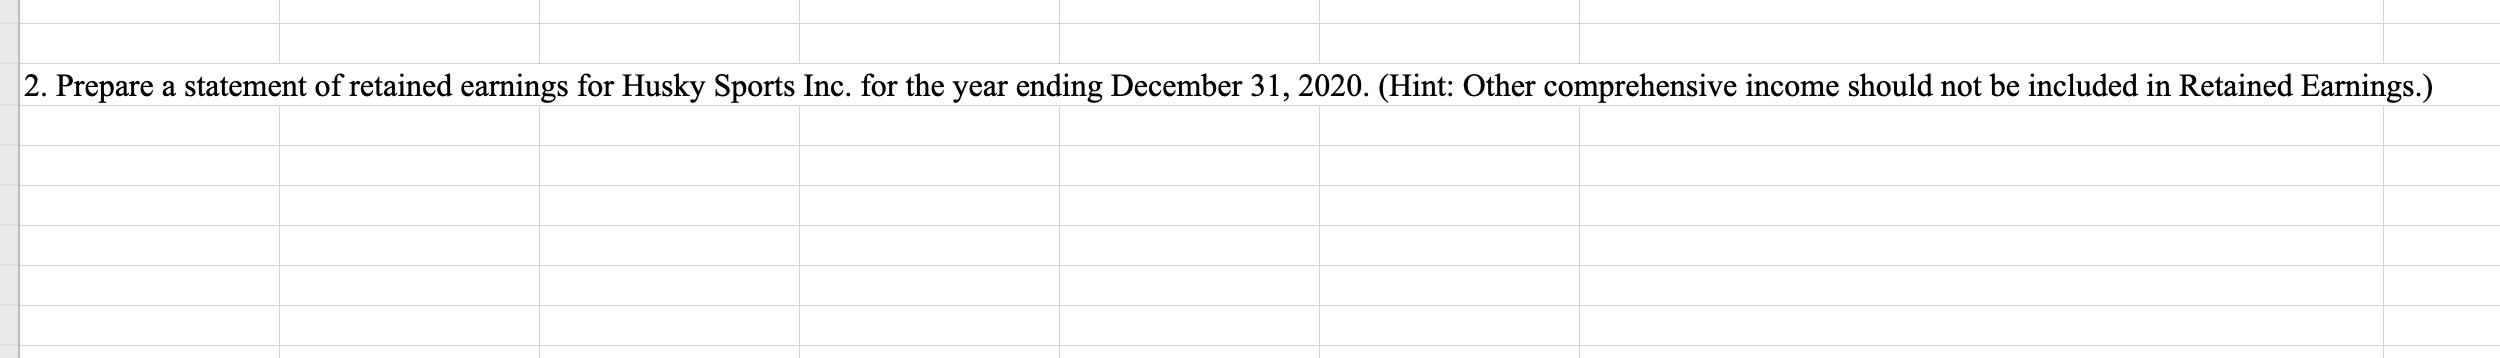 2. Prepare a statement of retained earnings for Husky Sports Inc. for the year ending December 31, 2020. (Hint: Other compreh